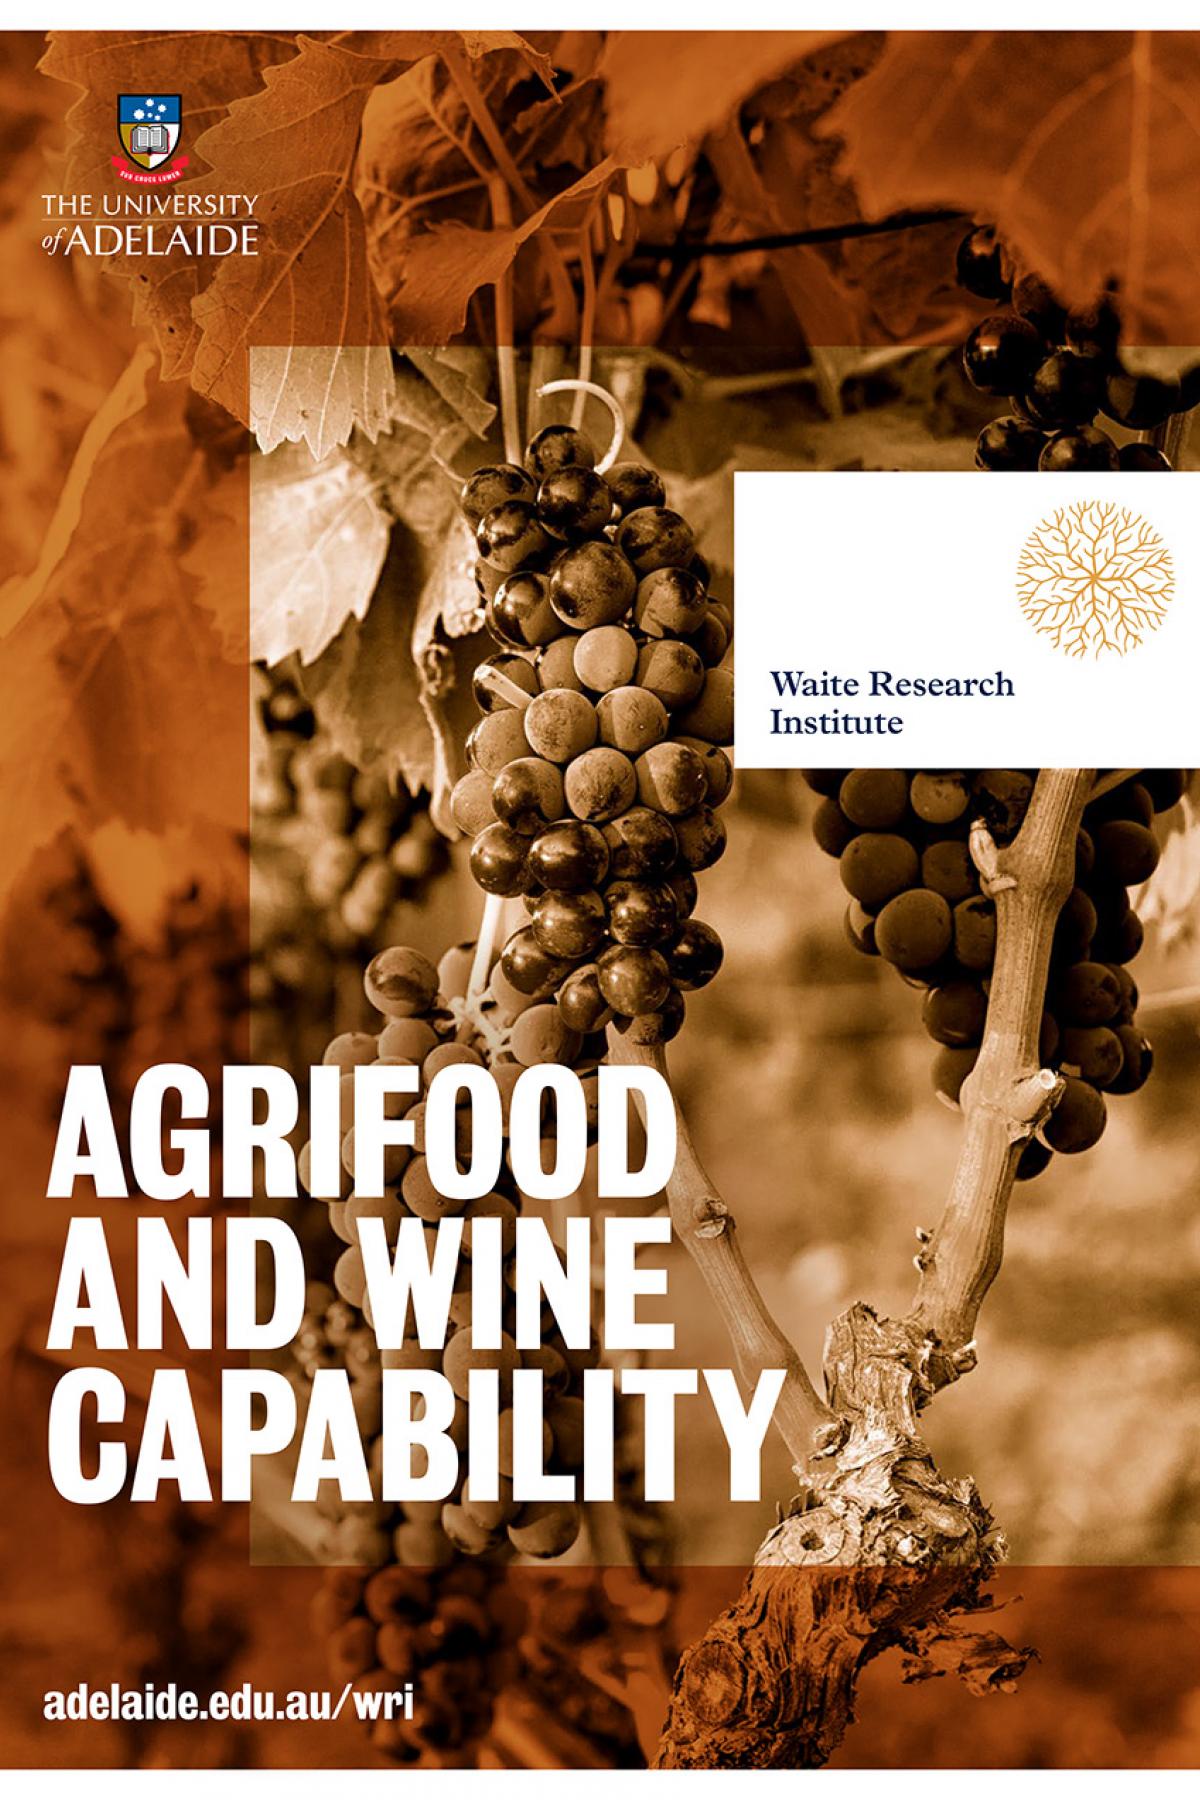 Agrifood and wine capability